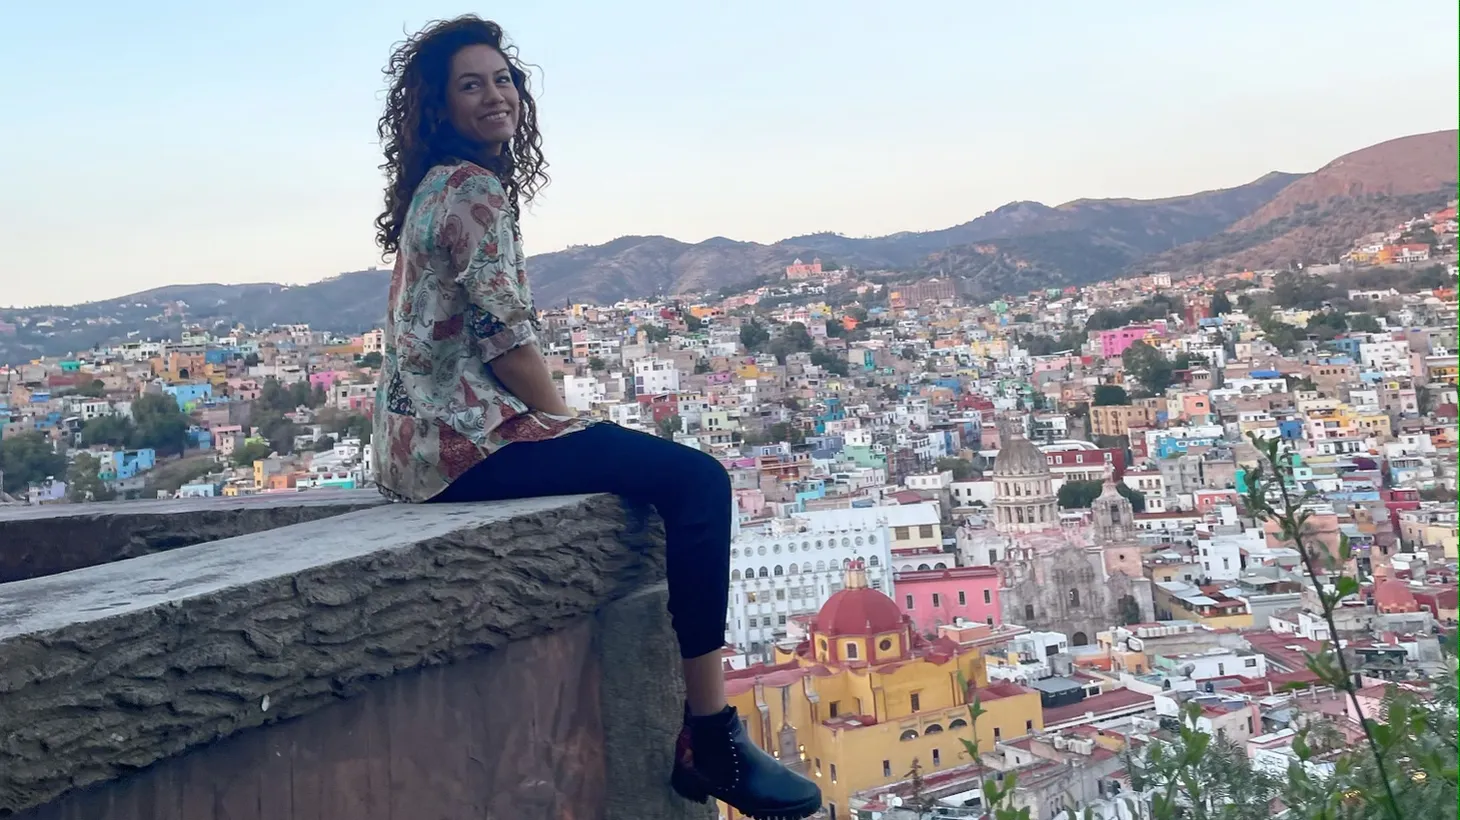 Ana Sheila Victorino traded in a fast-paced LA life for a soul-affirming experience in her hometown of Coyoacán, an area within Mexico City.